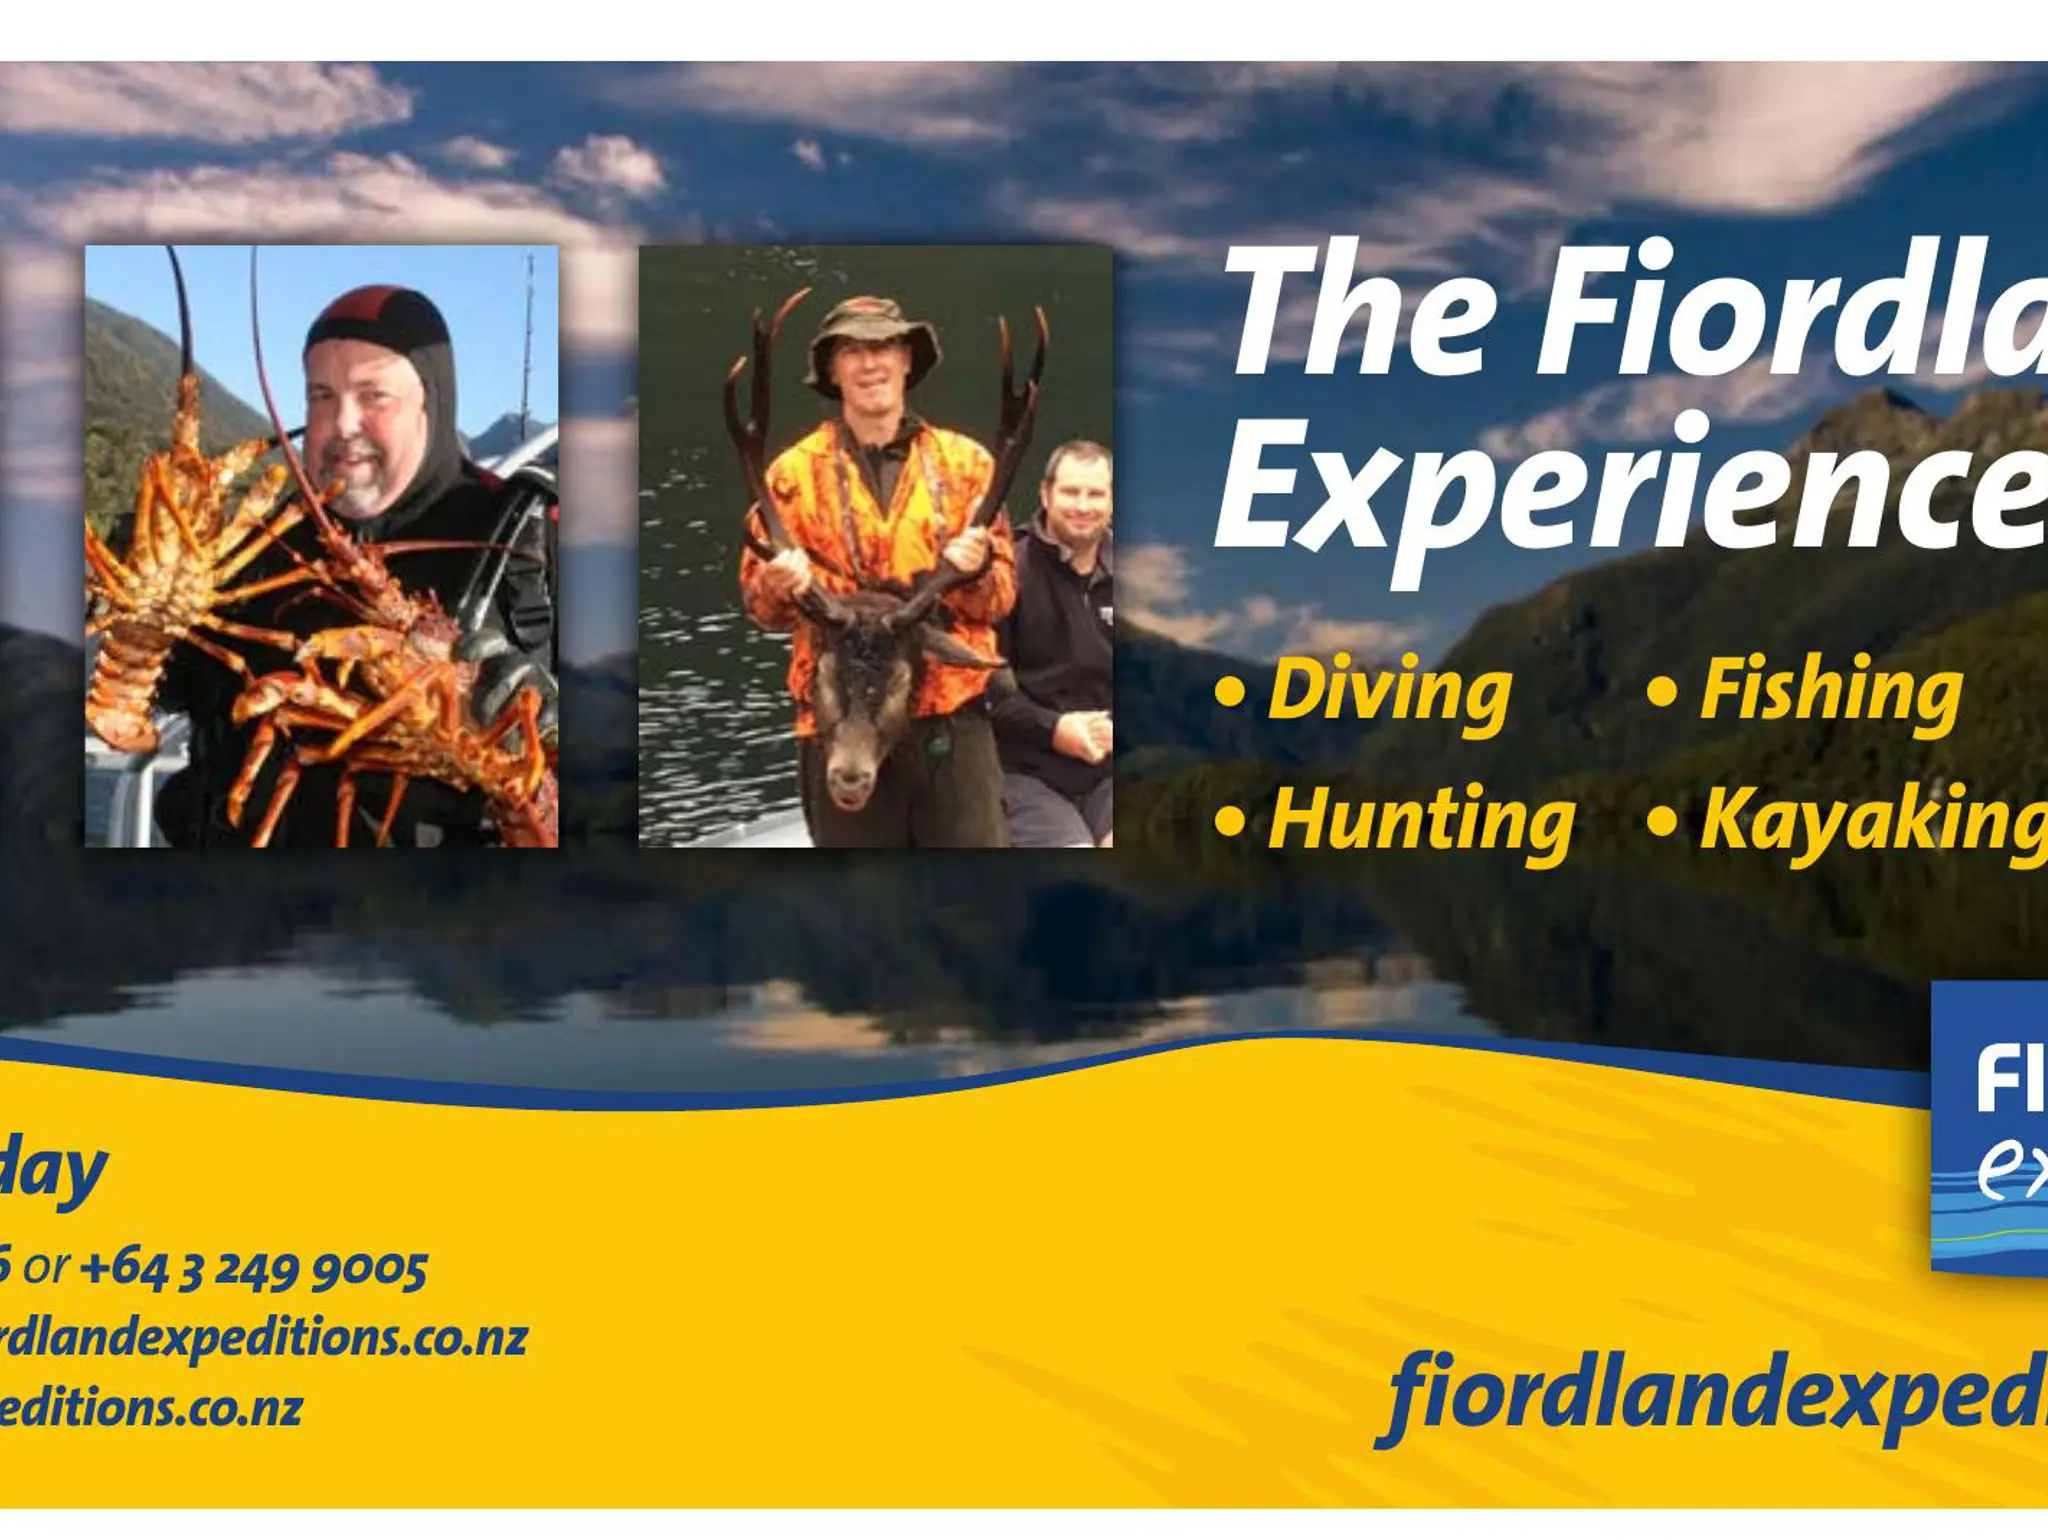 THE FIORDLAND EXPEDITIONS